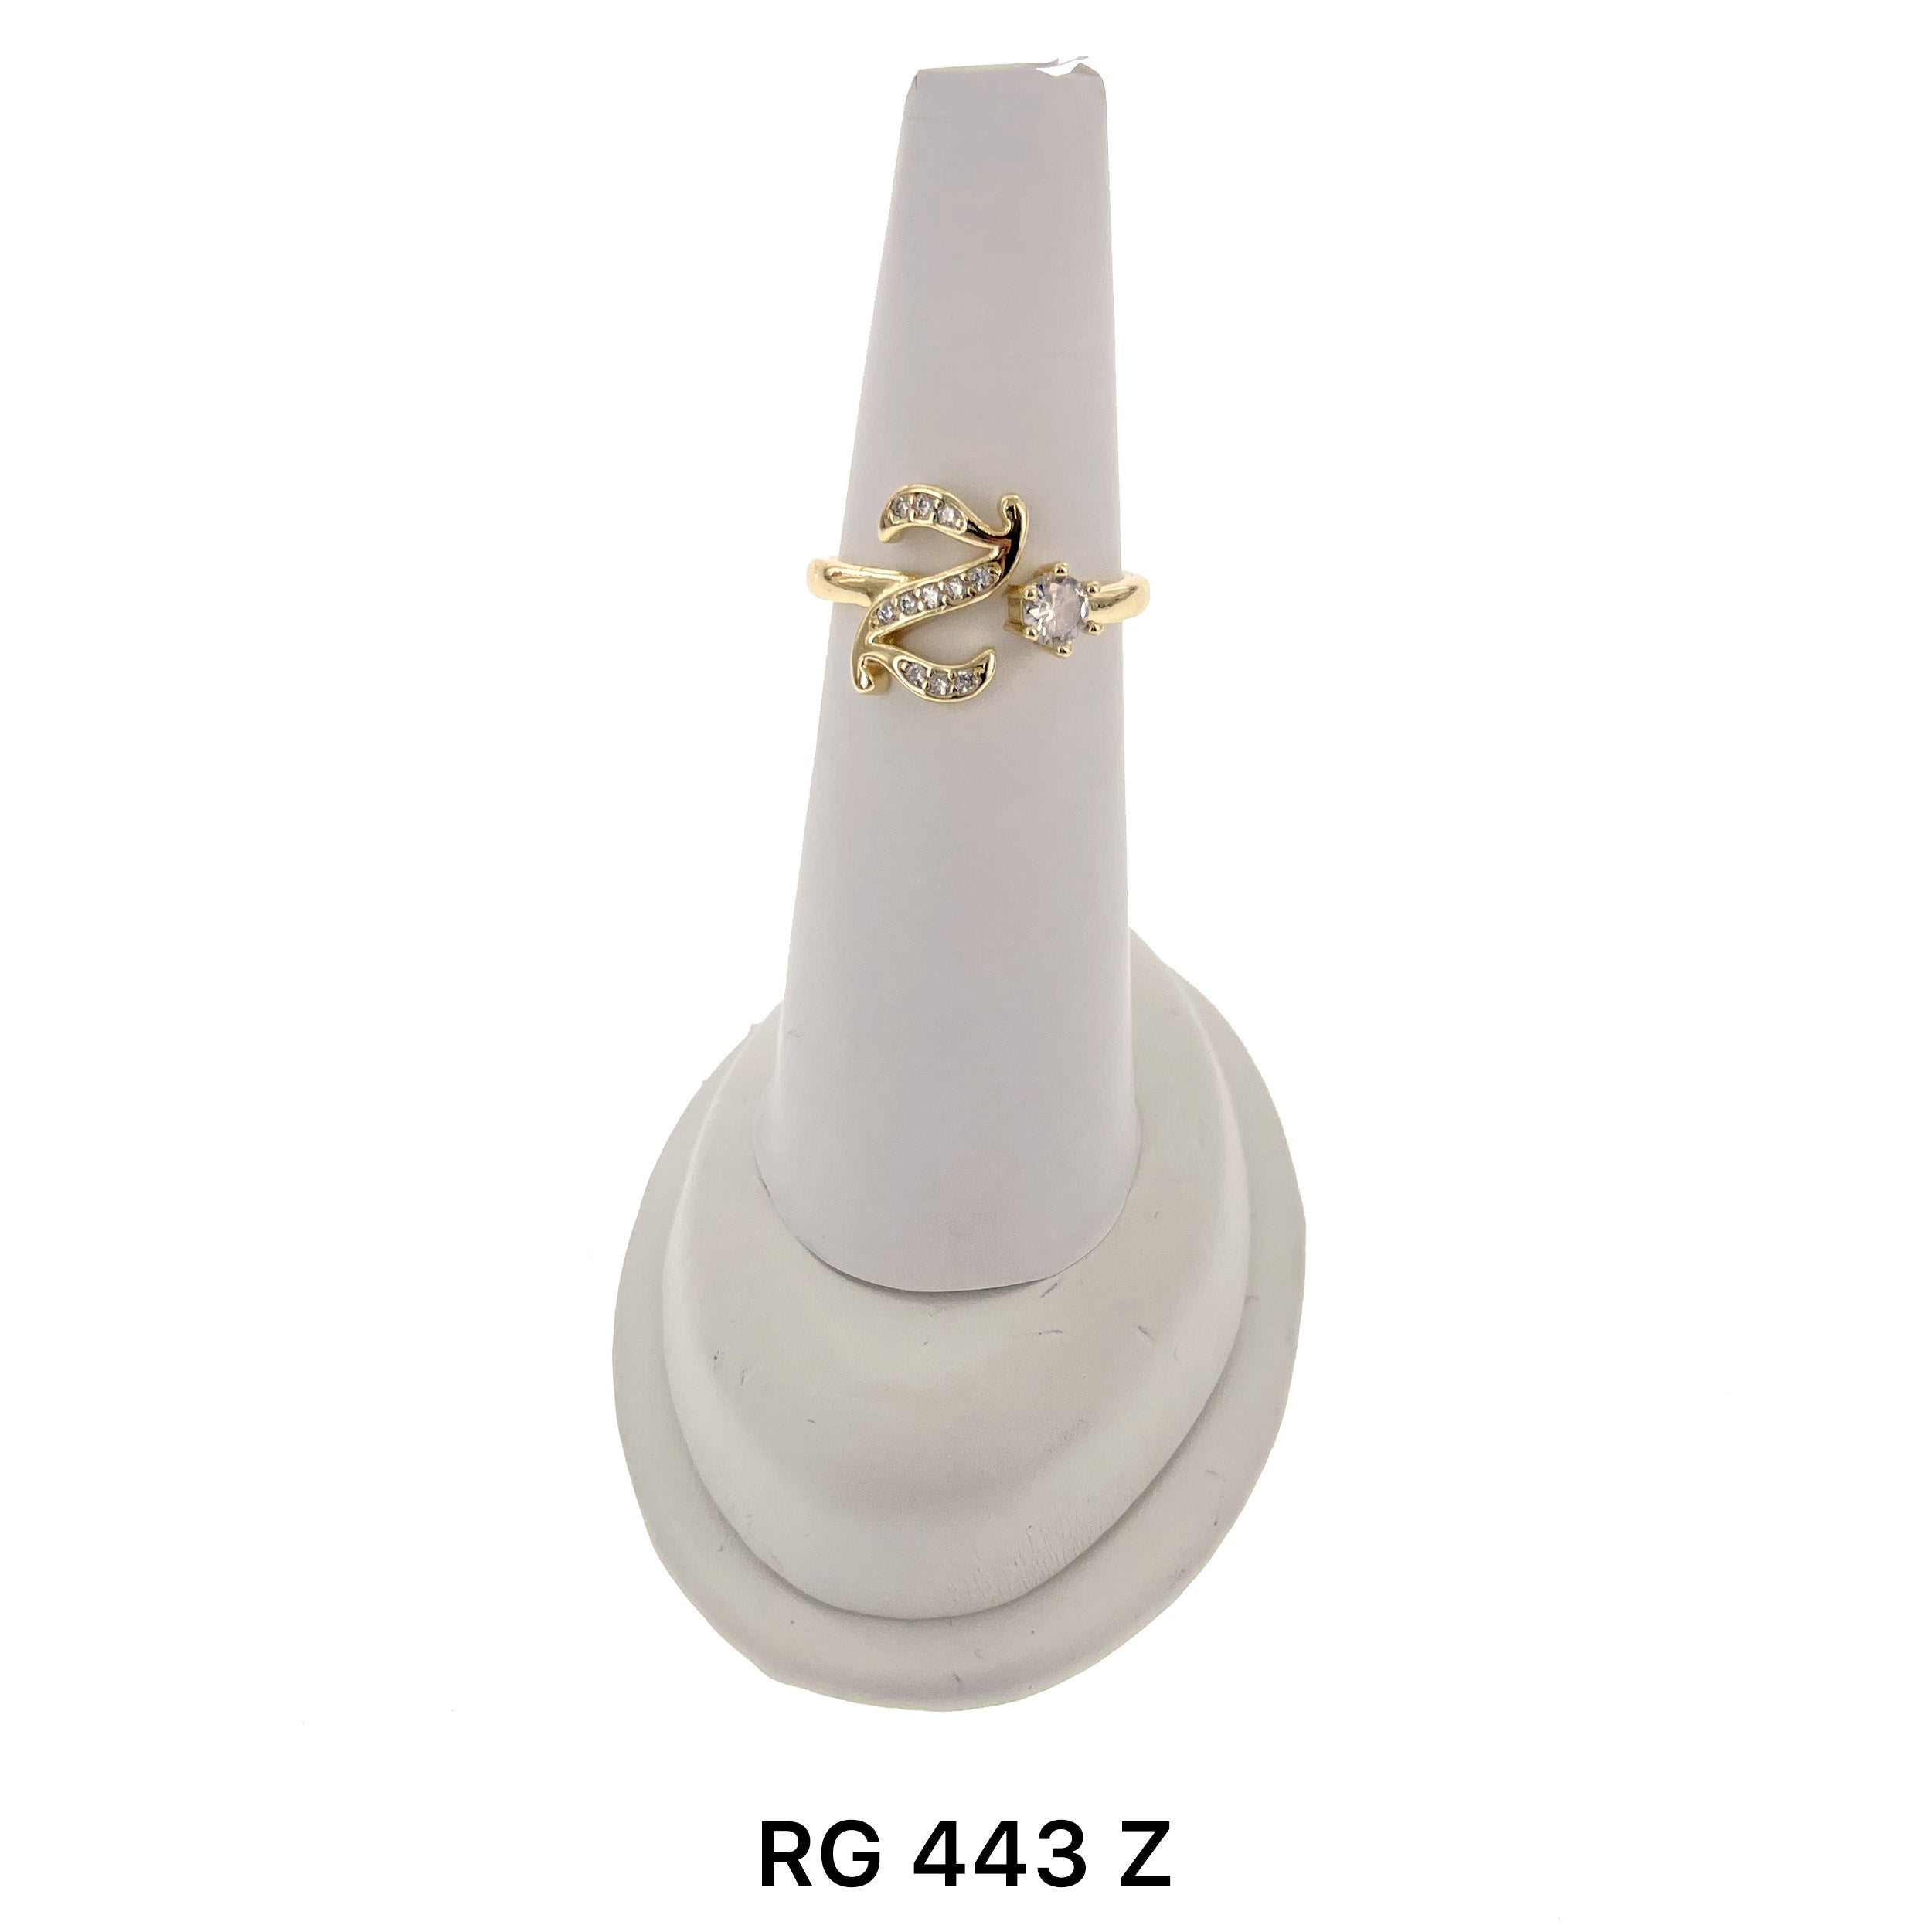 Initial Adjustable Ring RG 443 Z